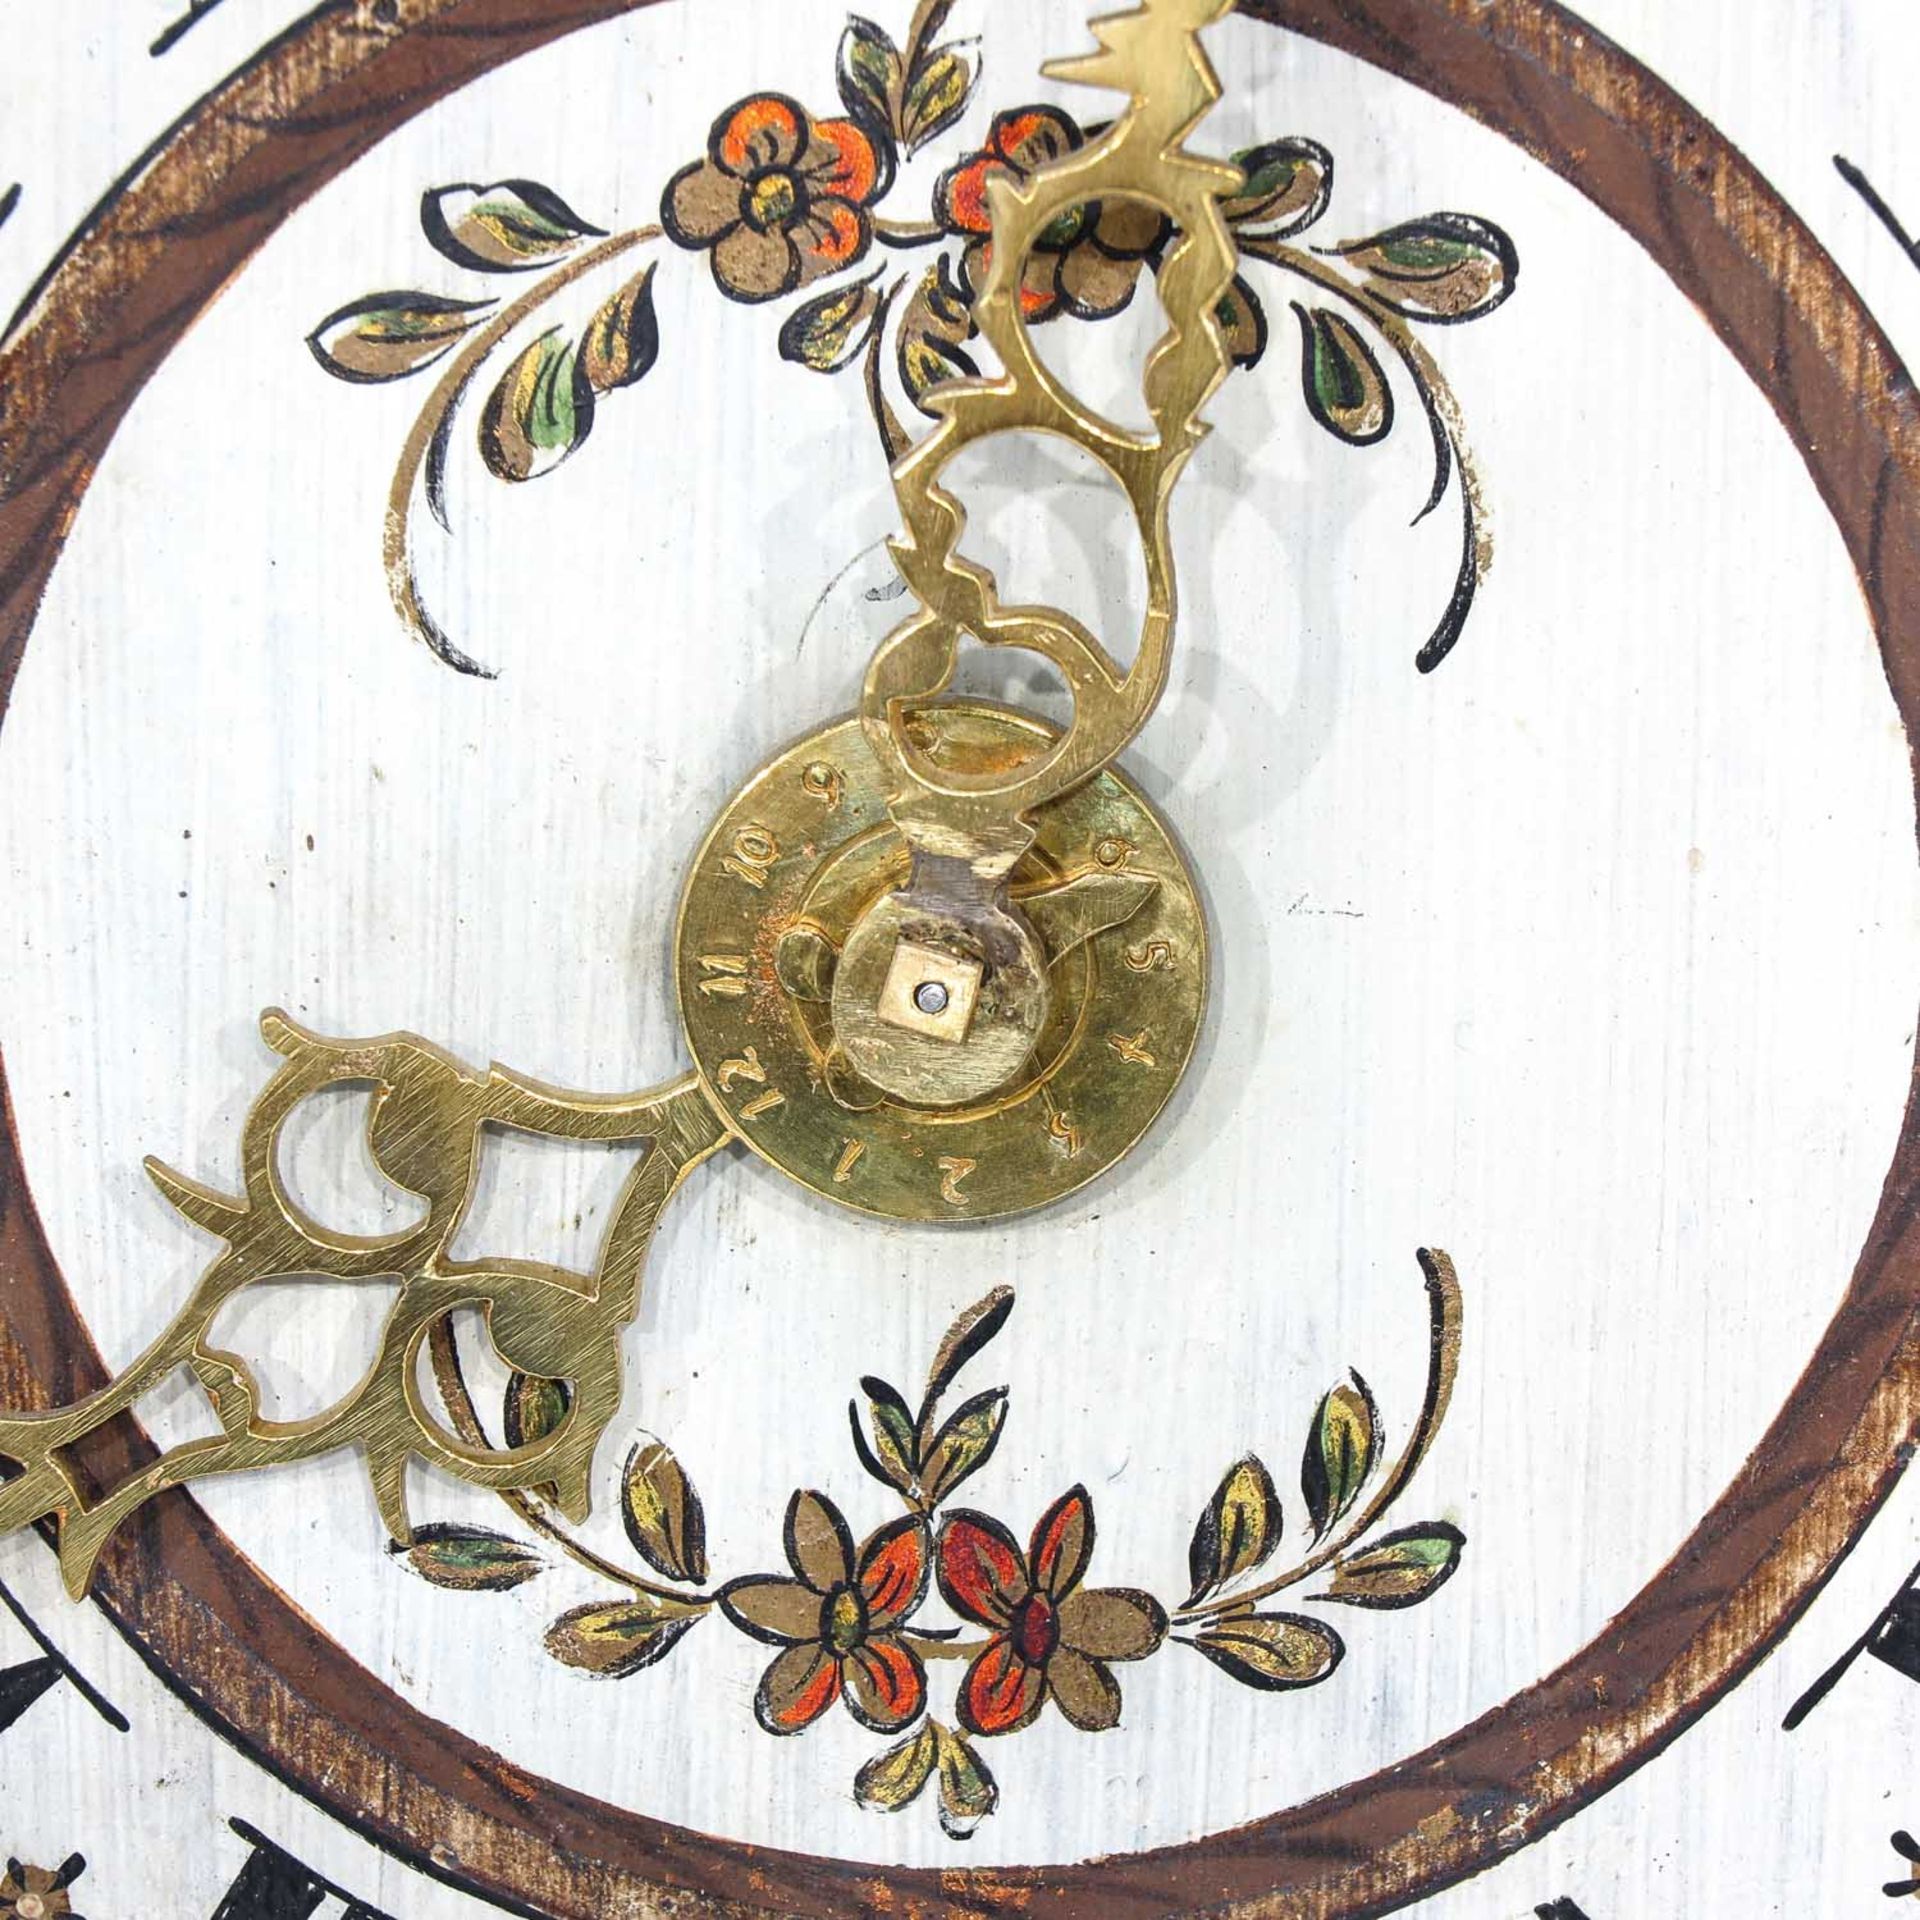 A 19th Century Friesland Wall Clock - Image 5 of 10